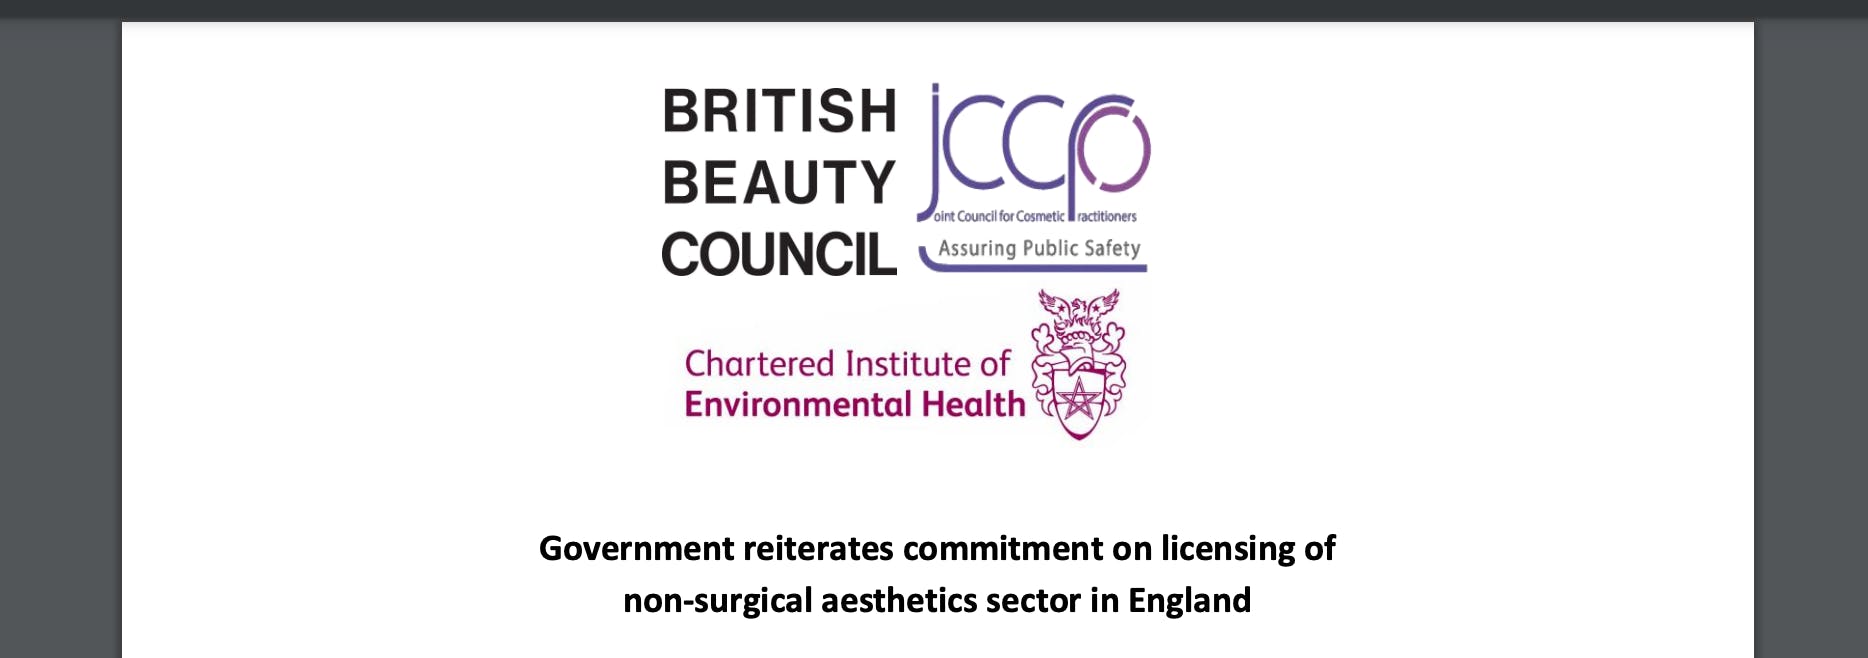 Aesthetics Licensing in England Confirmed by UK Government January 2023